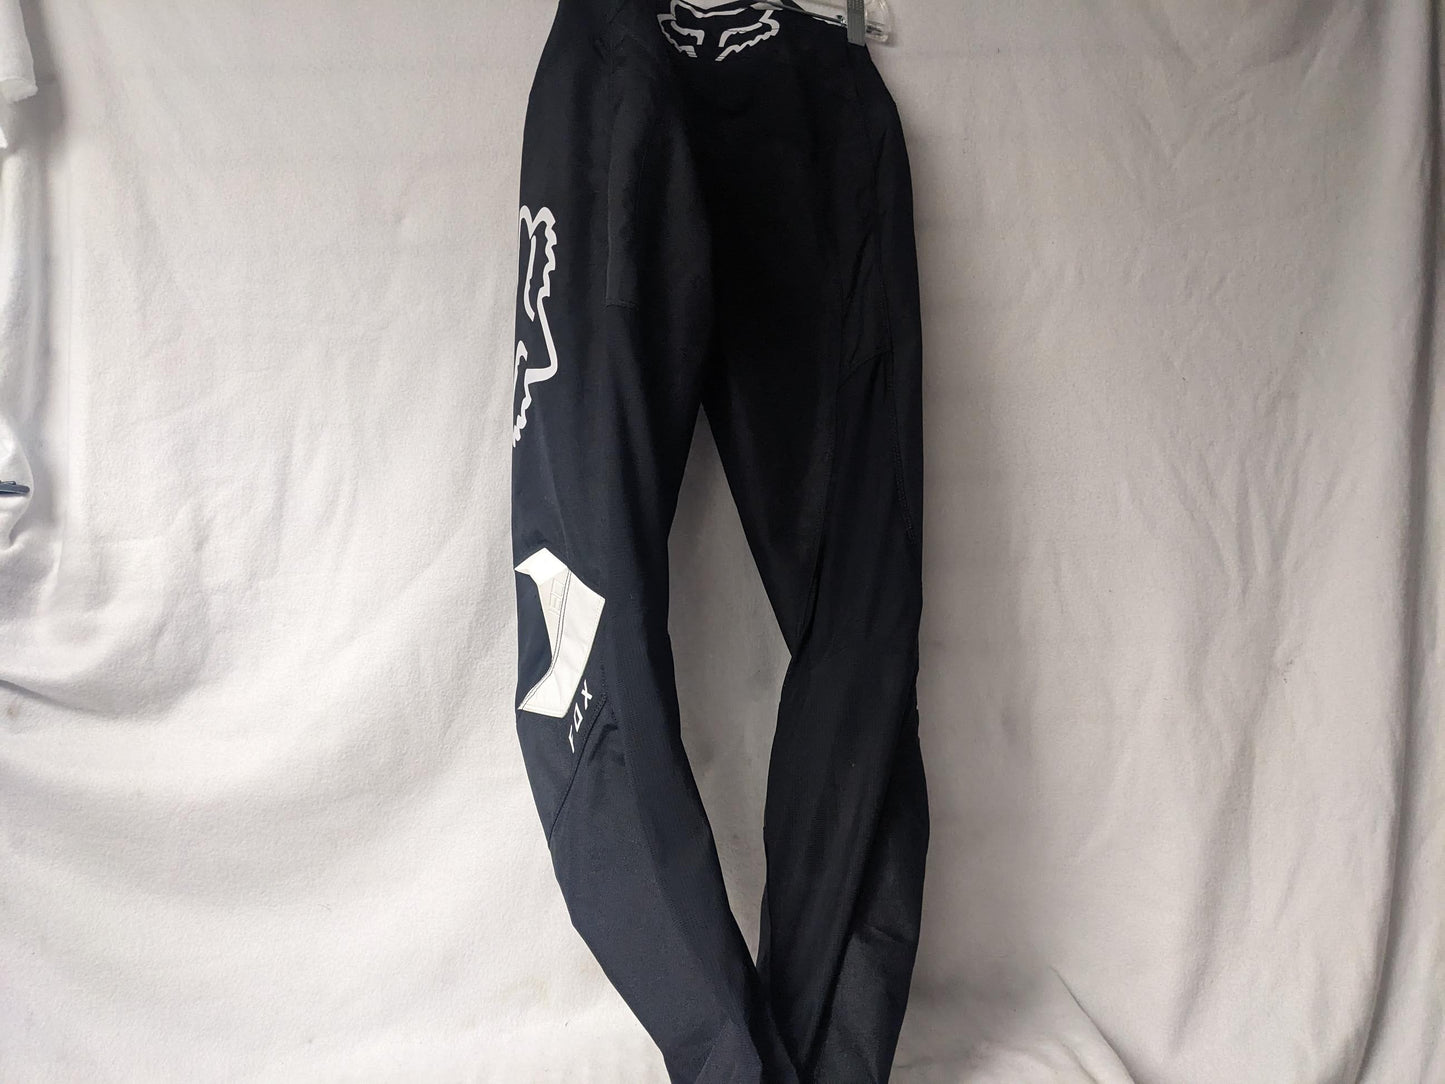 Fox MX Motocross Racing Pants Size 12-14 Waist 28 In Color Black Condition Used